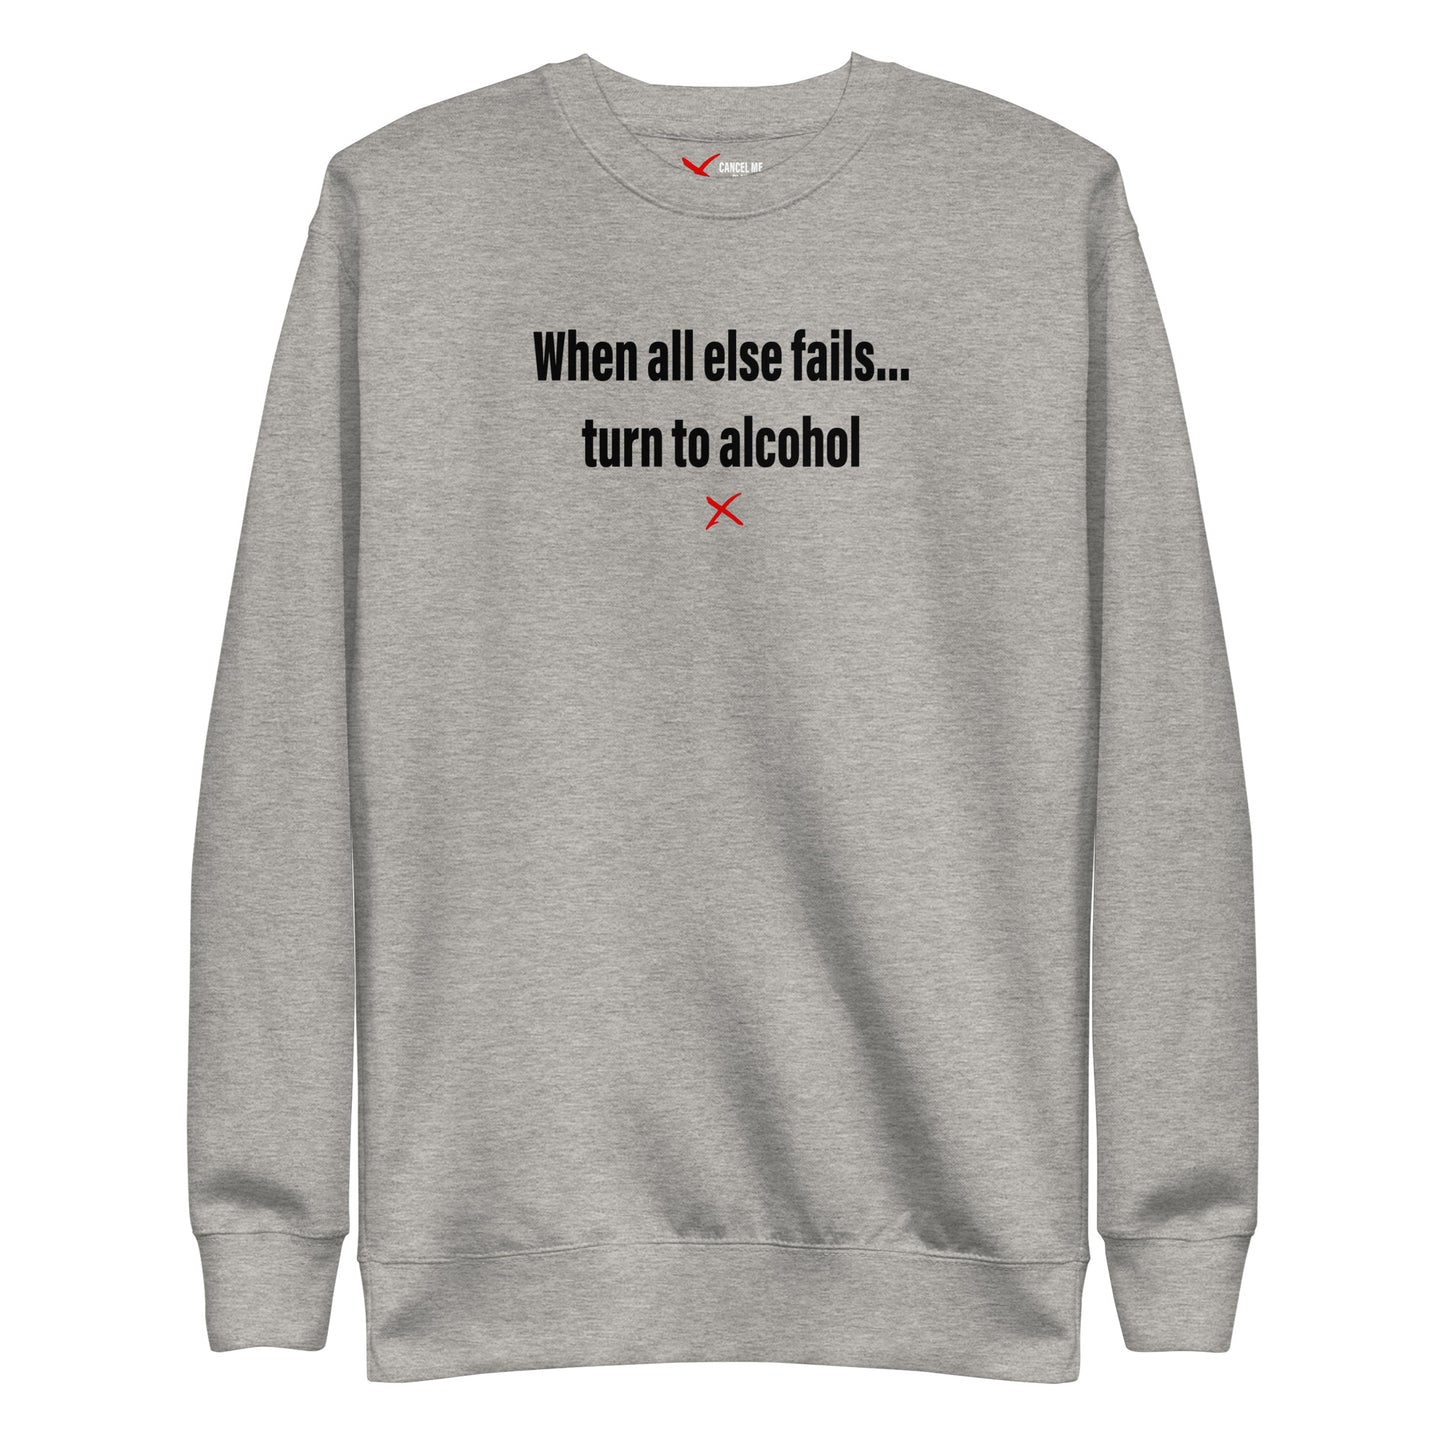 When all else fails... turn to alcohol - Sweatshirt